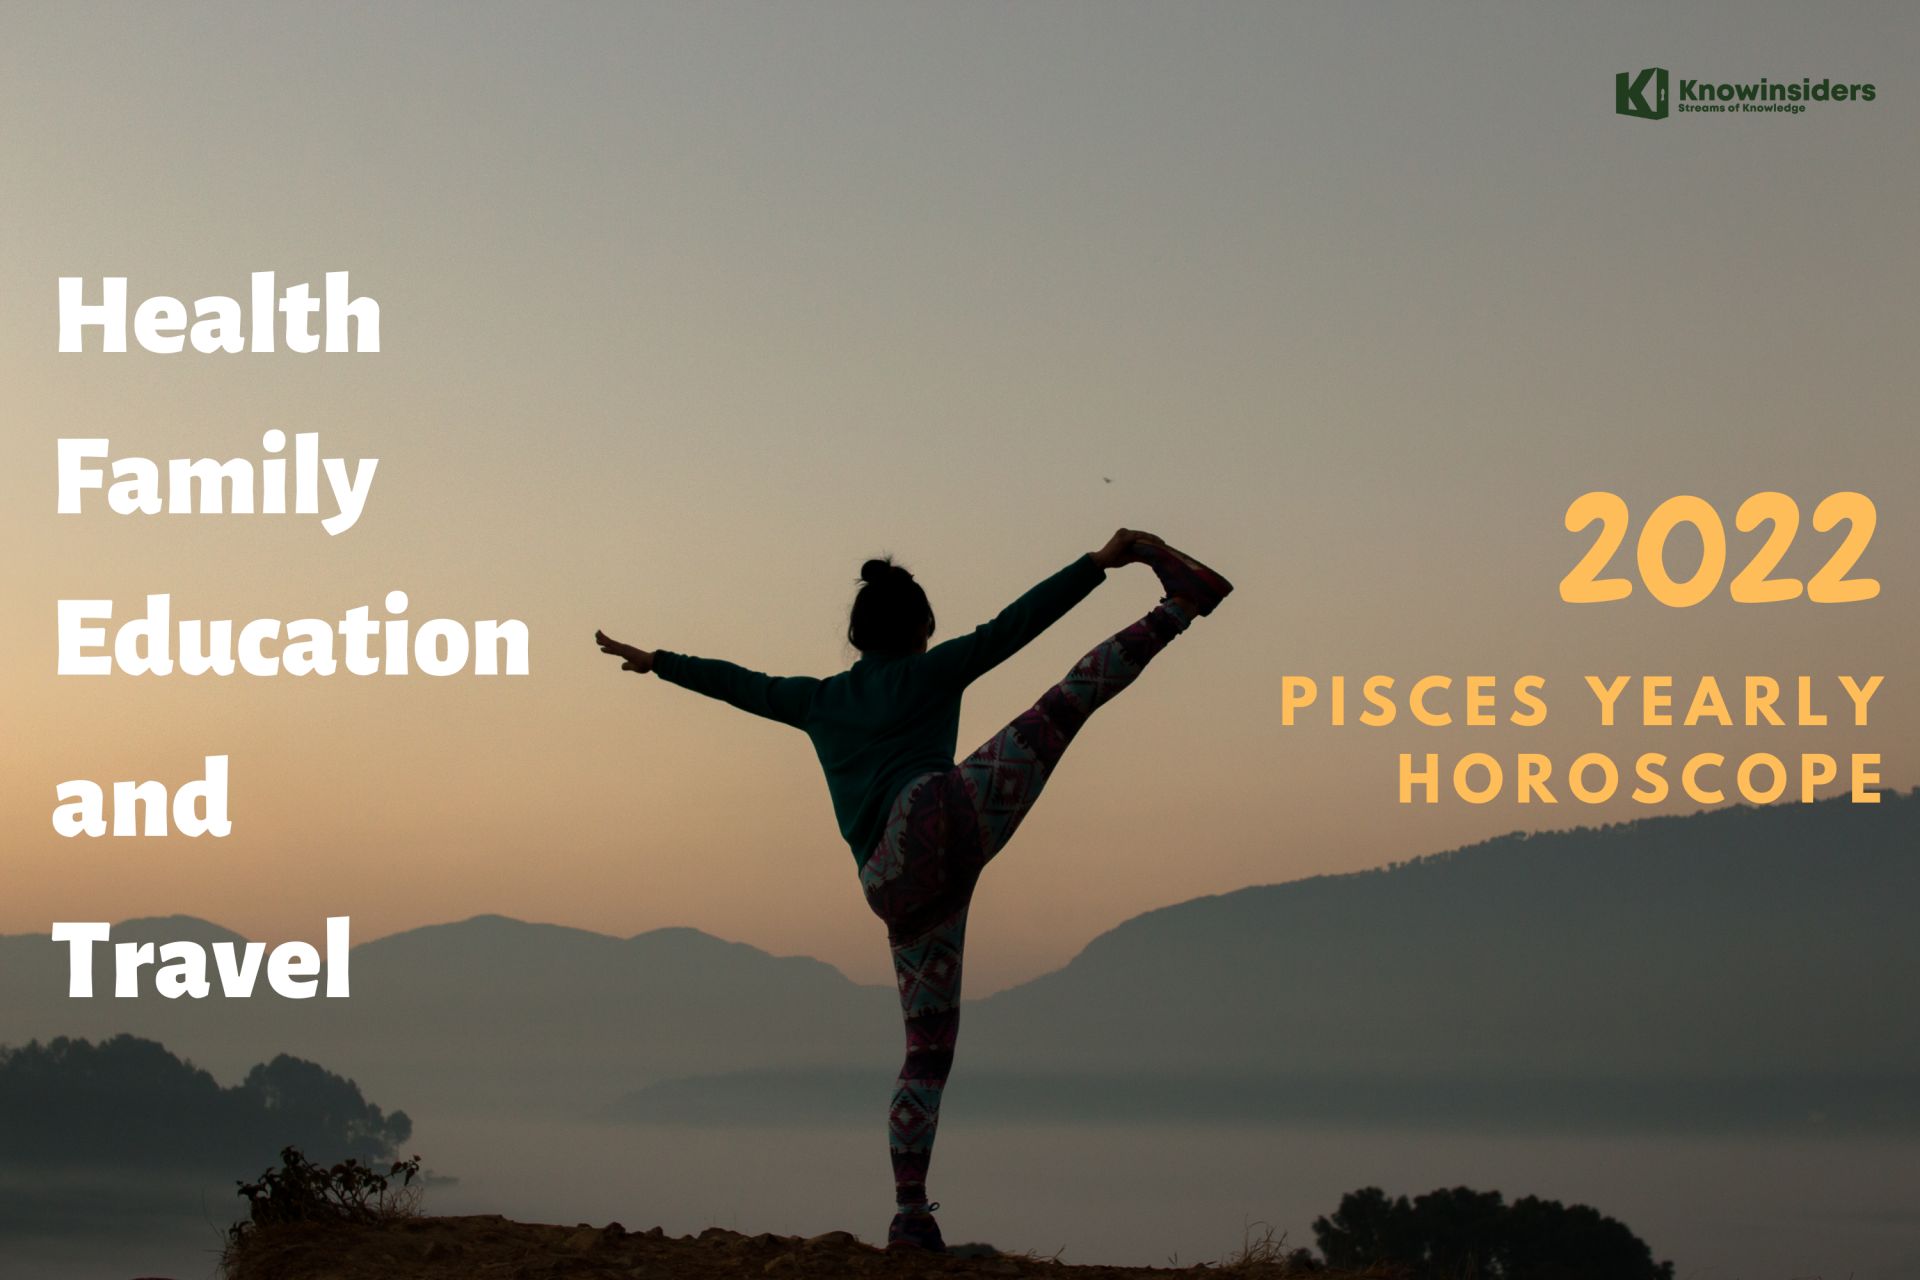 pisces yearly horoscope 2022 predictions for health family education and travel